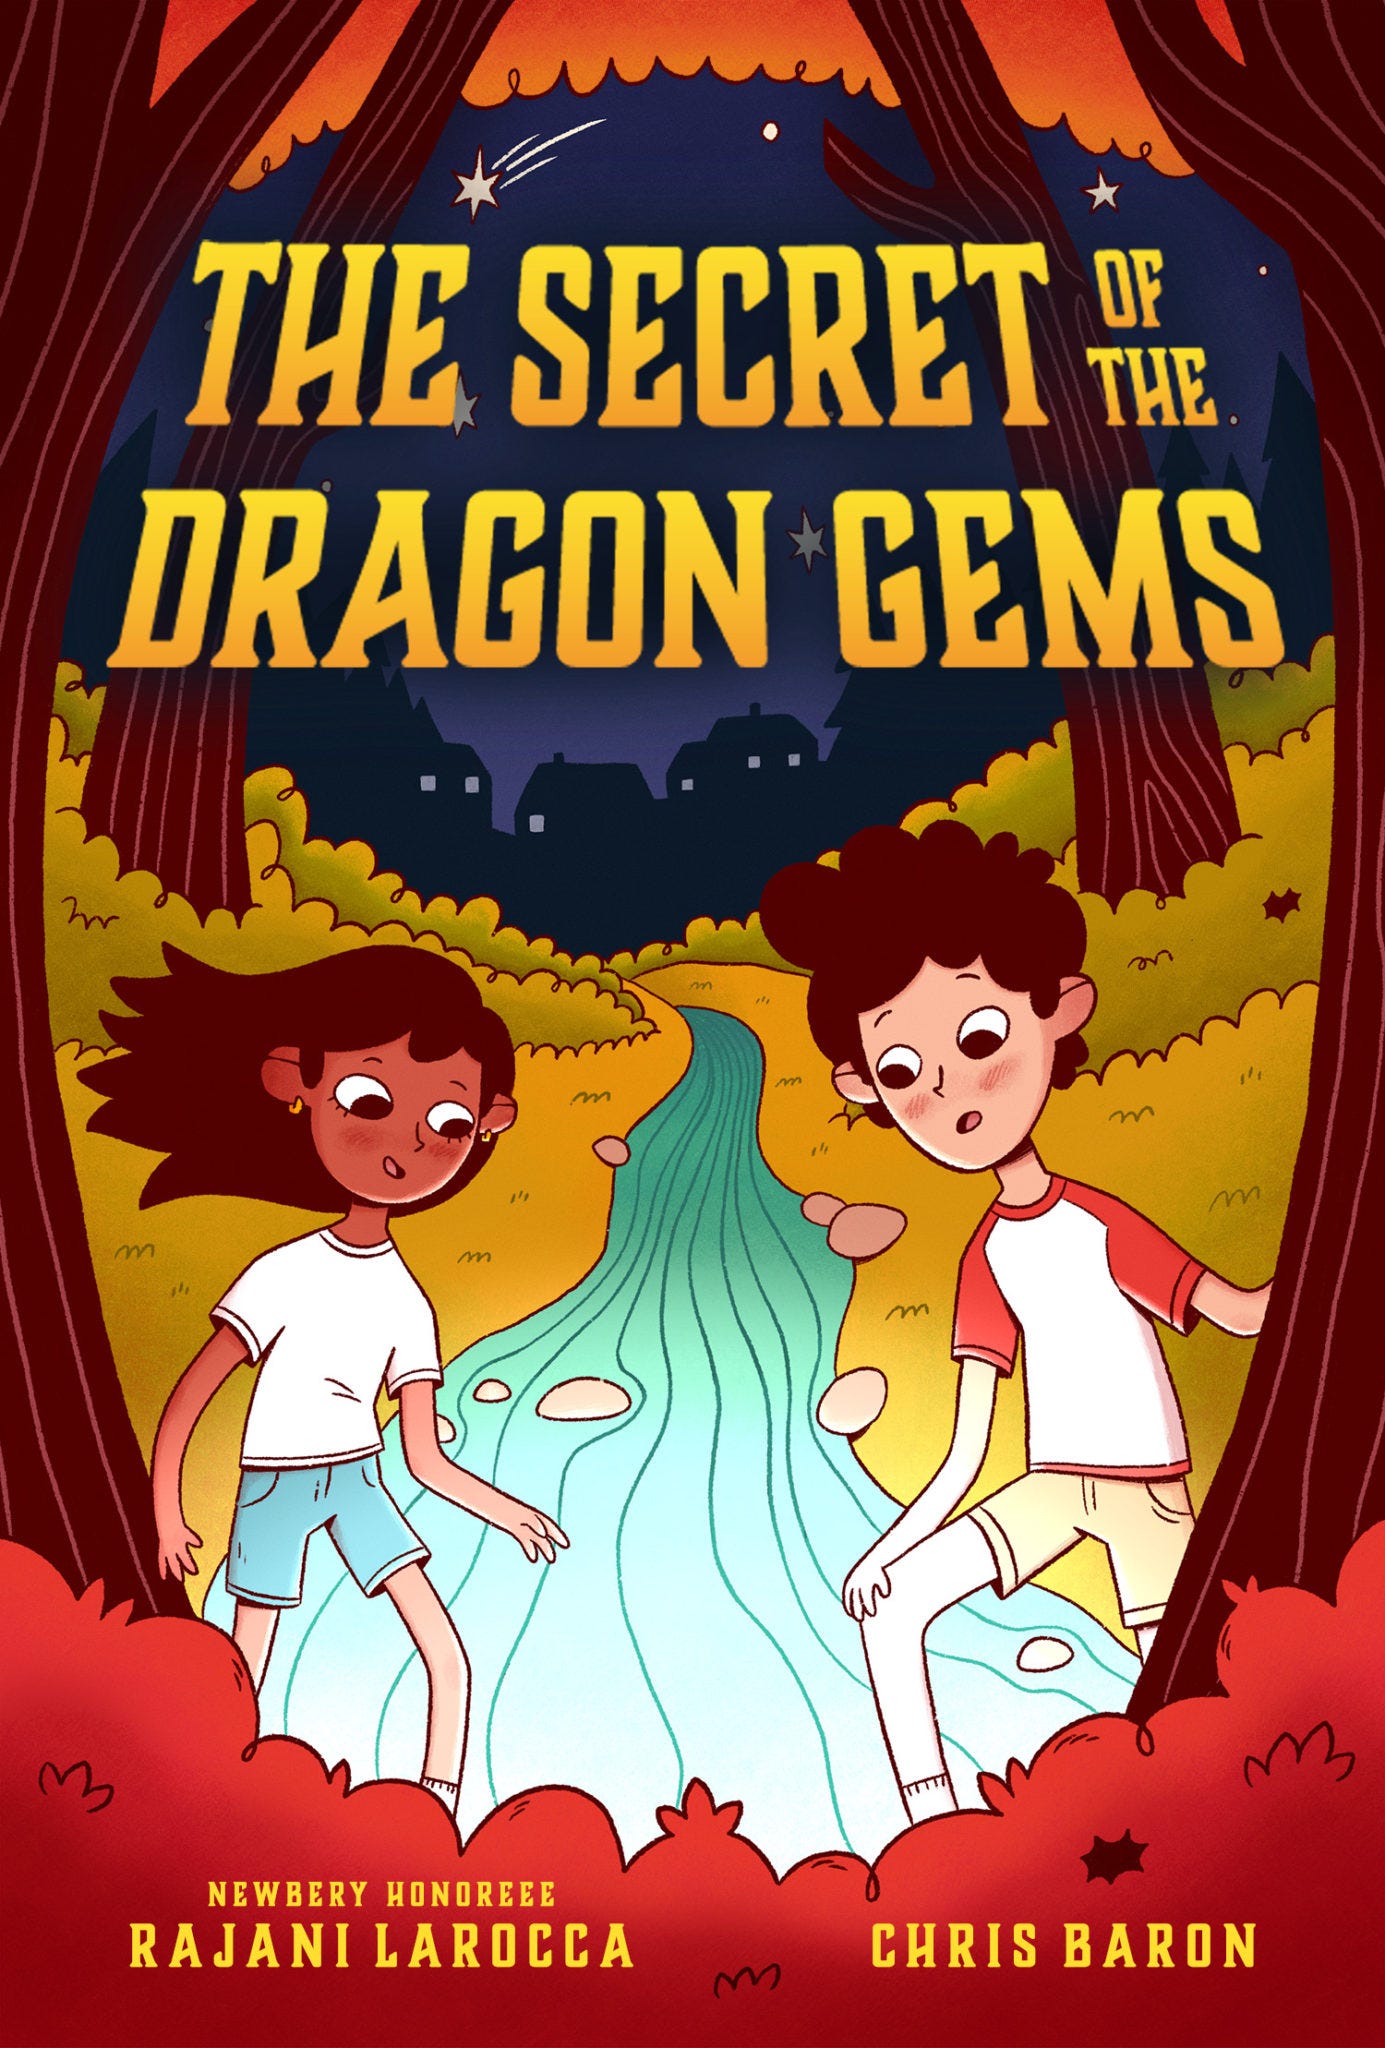 The cover of Secret of the Dragon Gems is illustrated, showing an Indian girl and a white boy looking at strange rocks by a glowing creek.